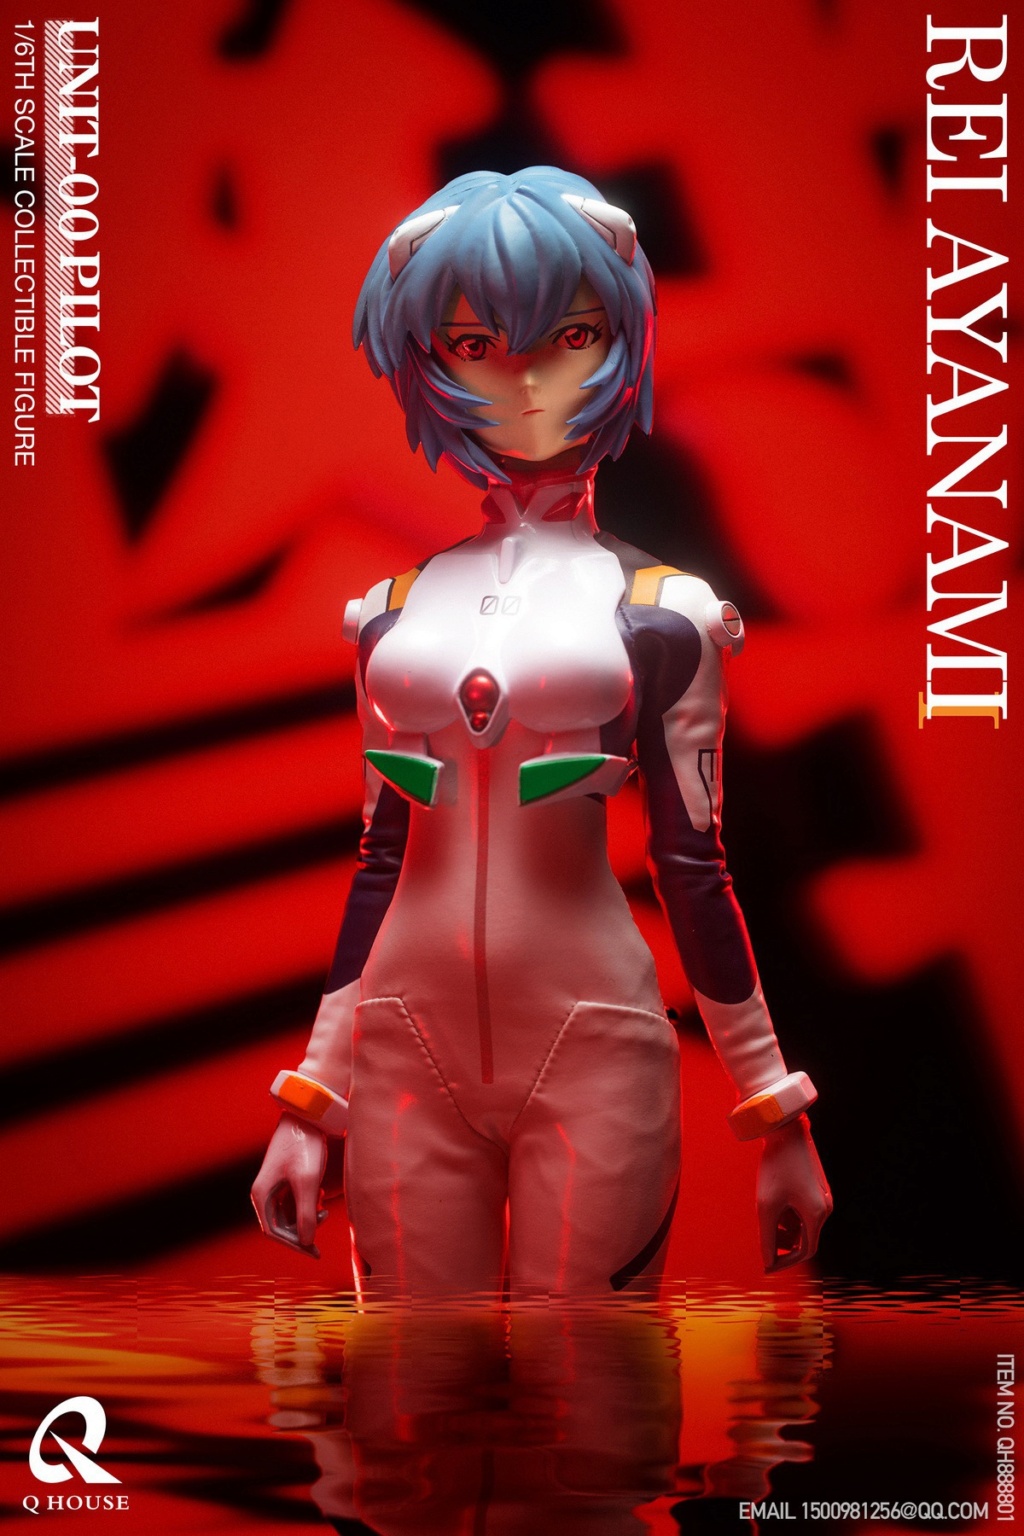 NEW PRODUCT: Q House: 1/6 Evangelion - Rei Ayanami  11143011